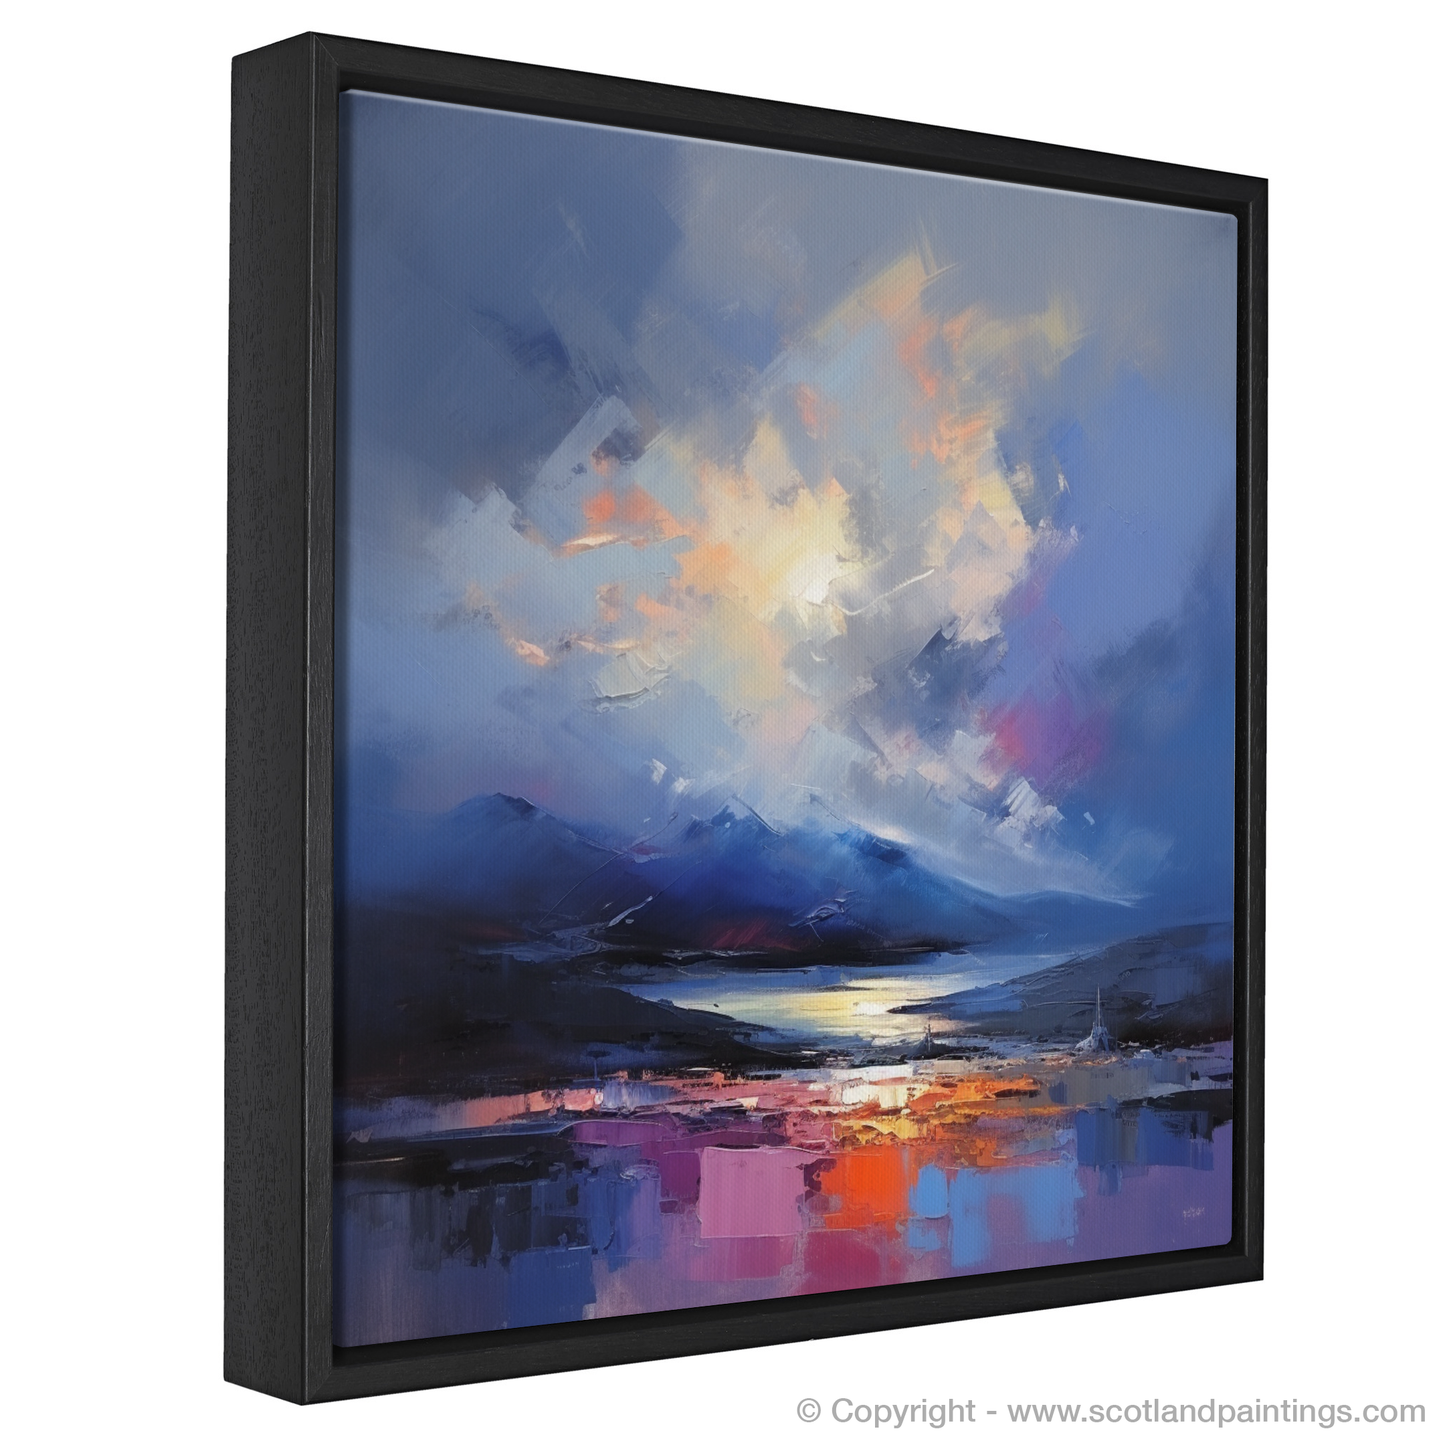 Painting and Art Print of Storm clouds above Loch Lomond entitled "Storm's Embrace over Loch Lomond".